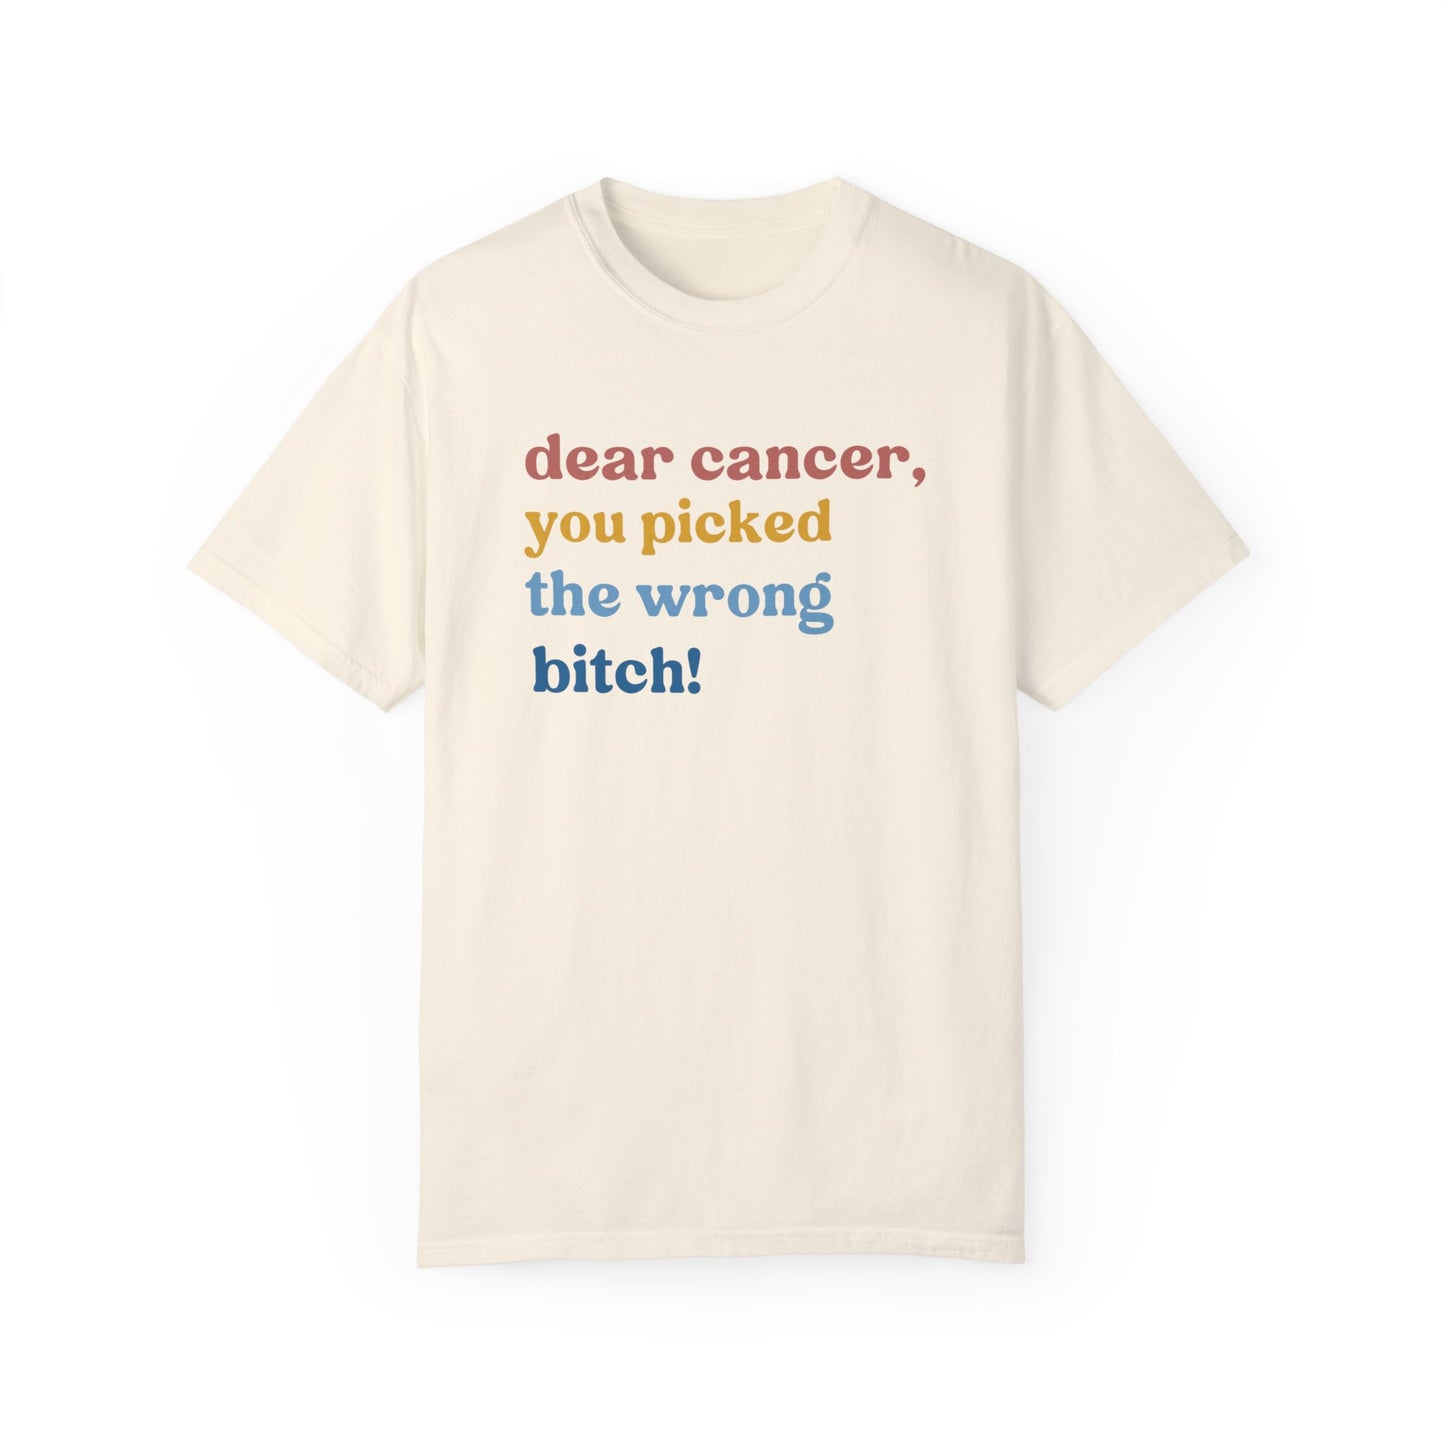 Health is Wealth, Dear Cancer You Picked The Wrong Bitch Shirt, Cancer Awareness Shirt, Breast Cancer Support, Comfort Colors Shirt, CC440